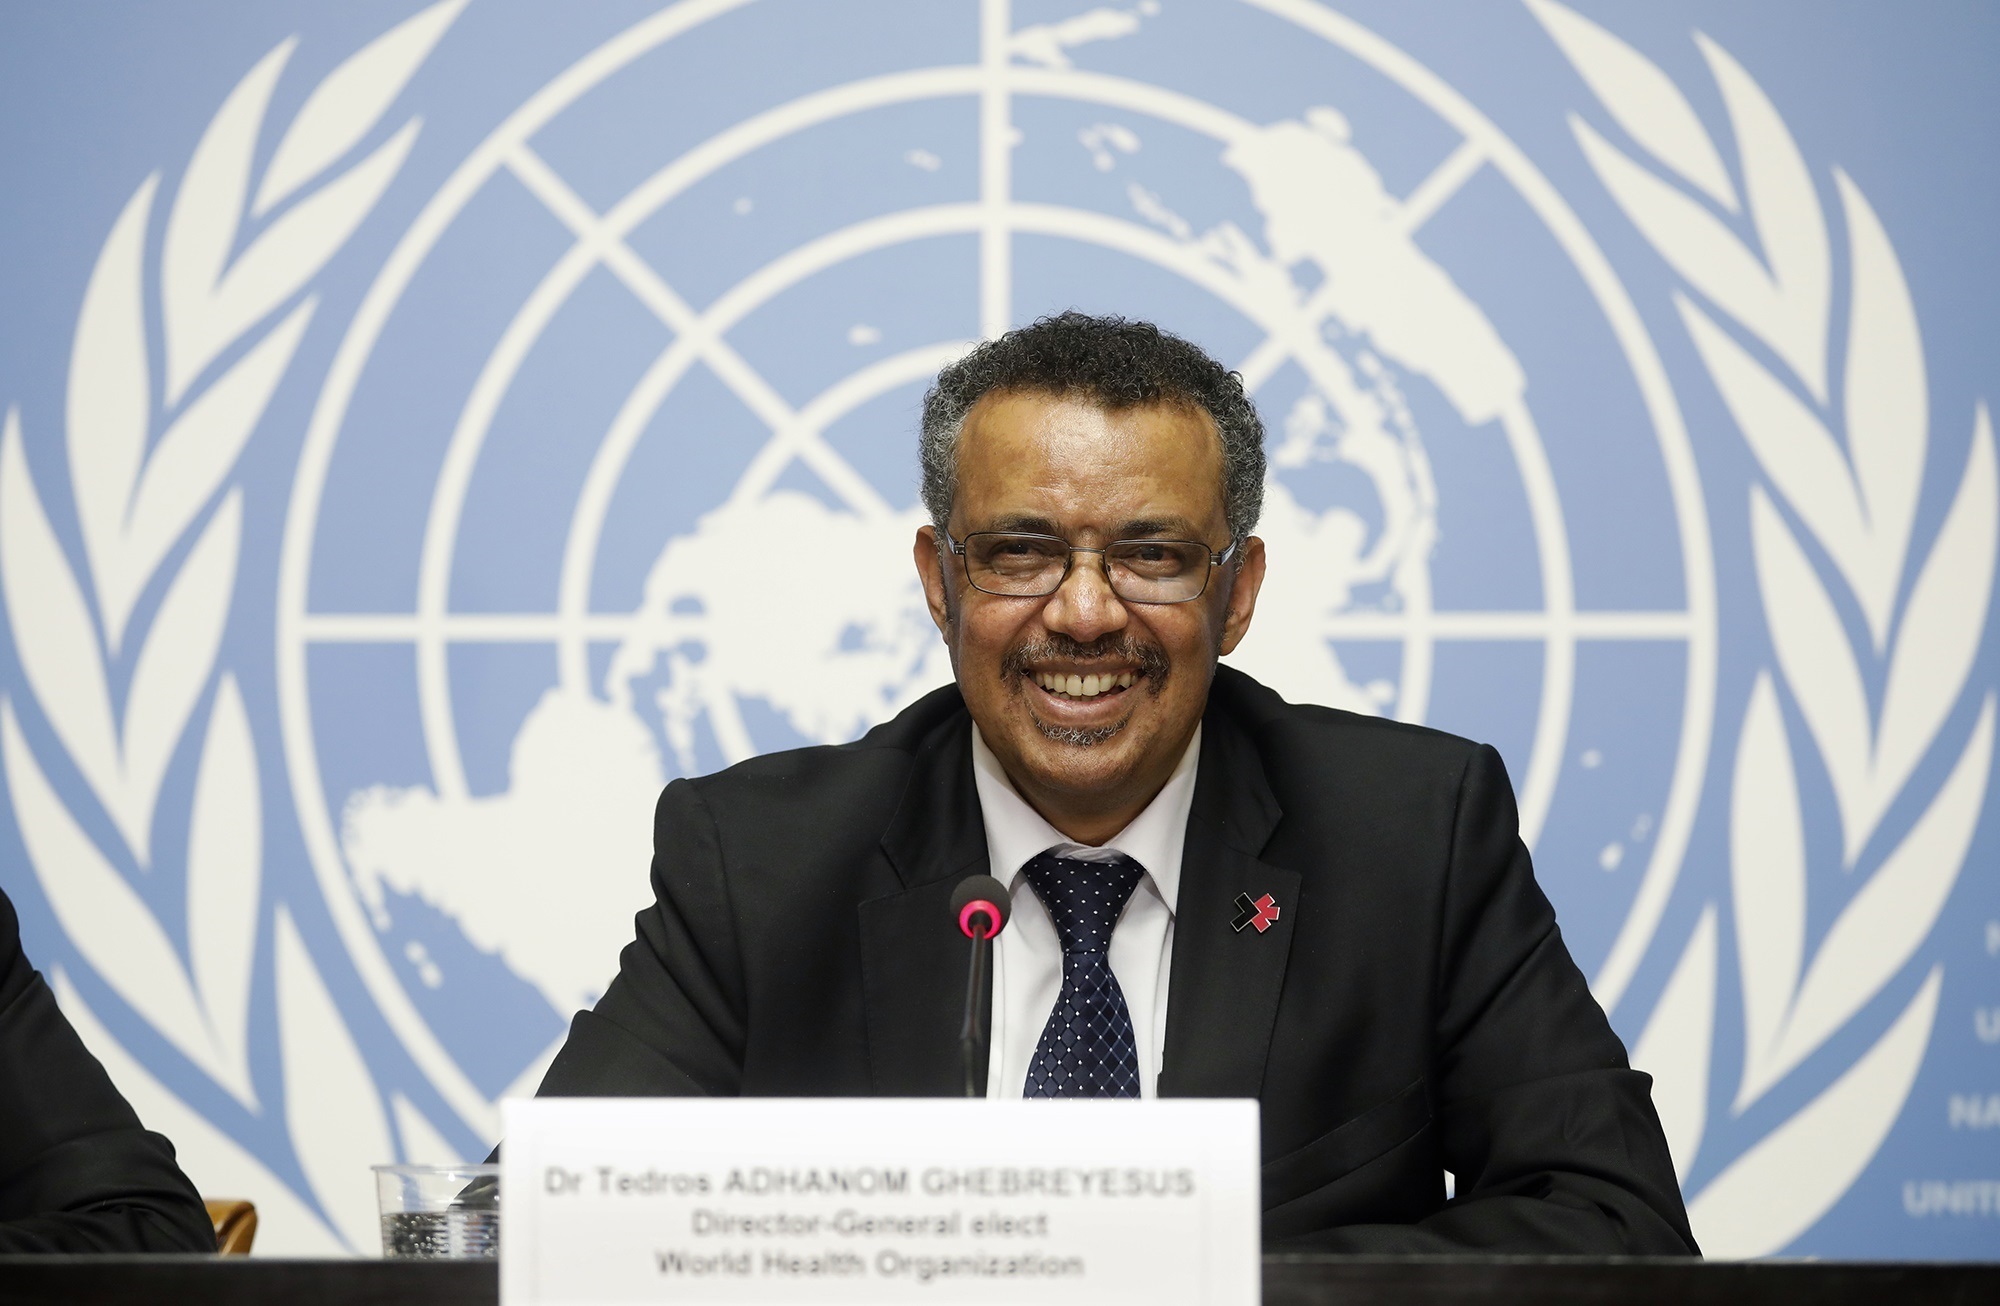 Tedros Adhanom Ghebreyesus was emphatic in stating about the need to investigate the causes that gave rise to the Covid-19 pandemic